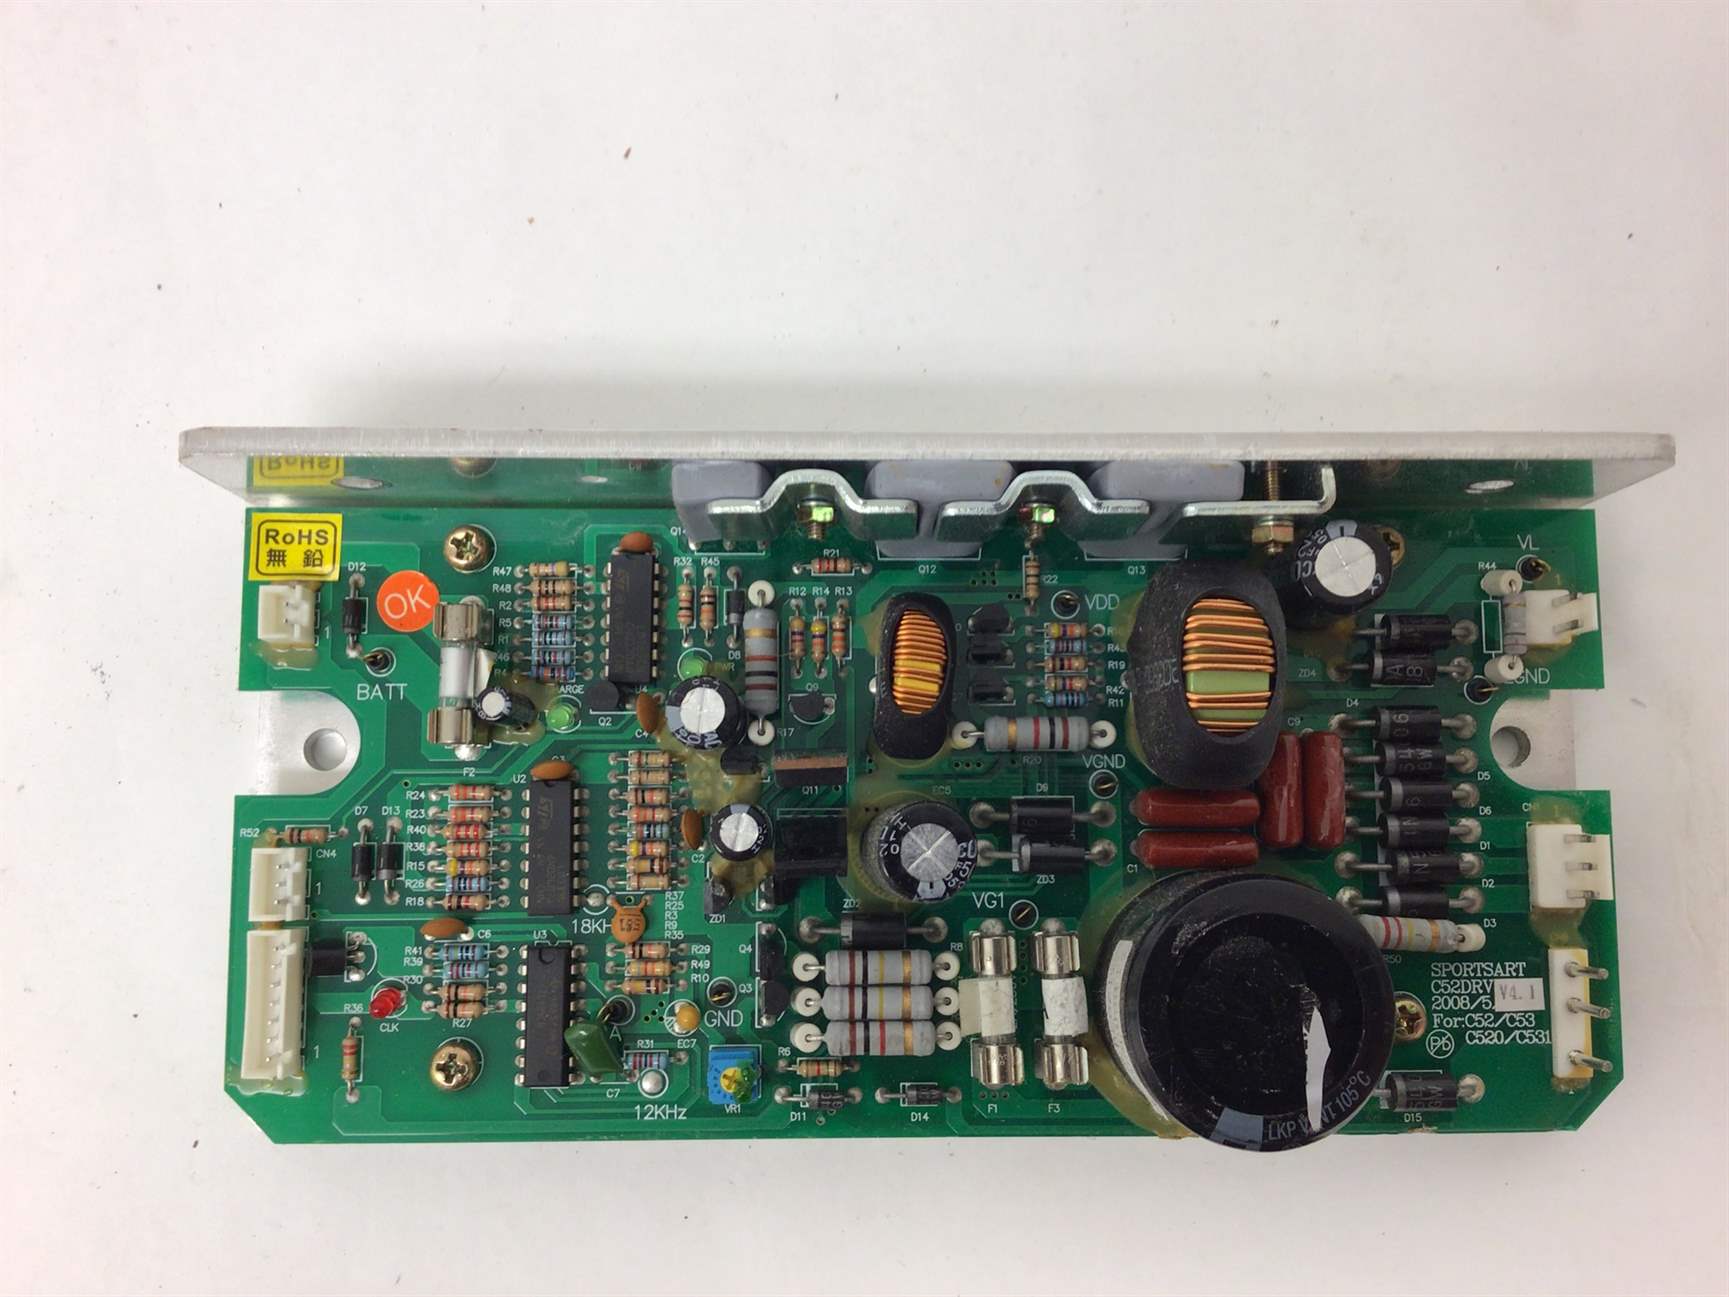 Control Power Supply Board - Controller C52DRV (Used)